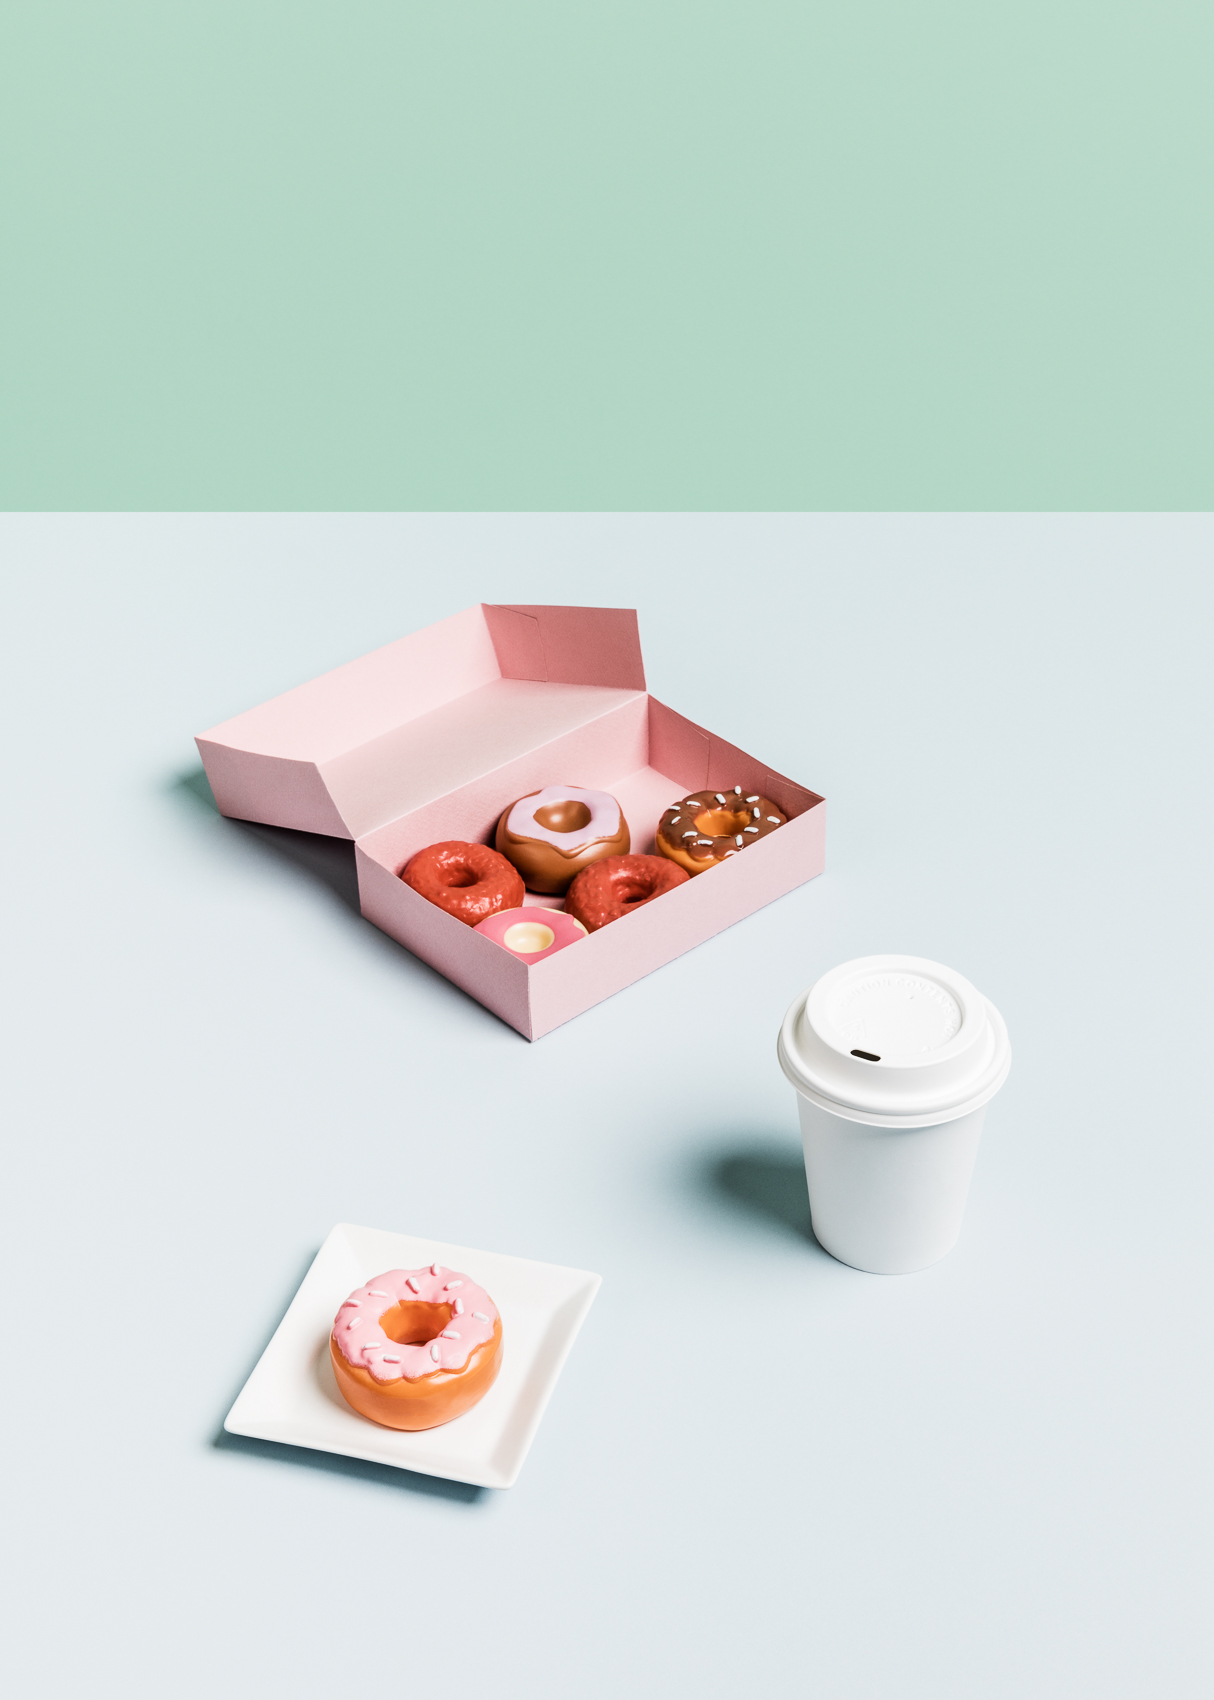 Zero Calories #4 | Los Angeles | Editorial and Commercial Photographer Patrick Strattner